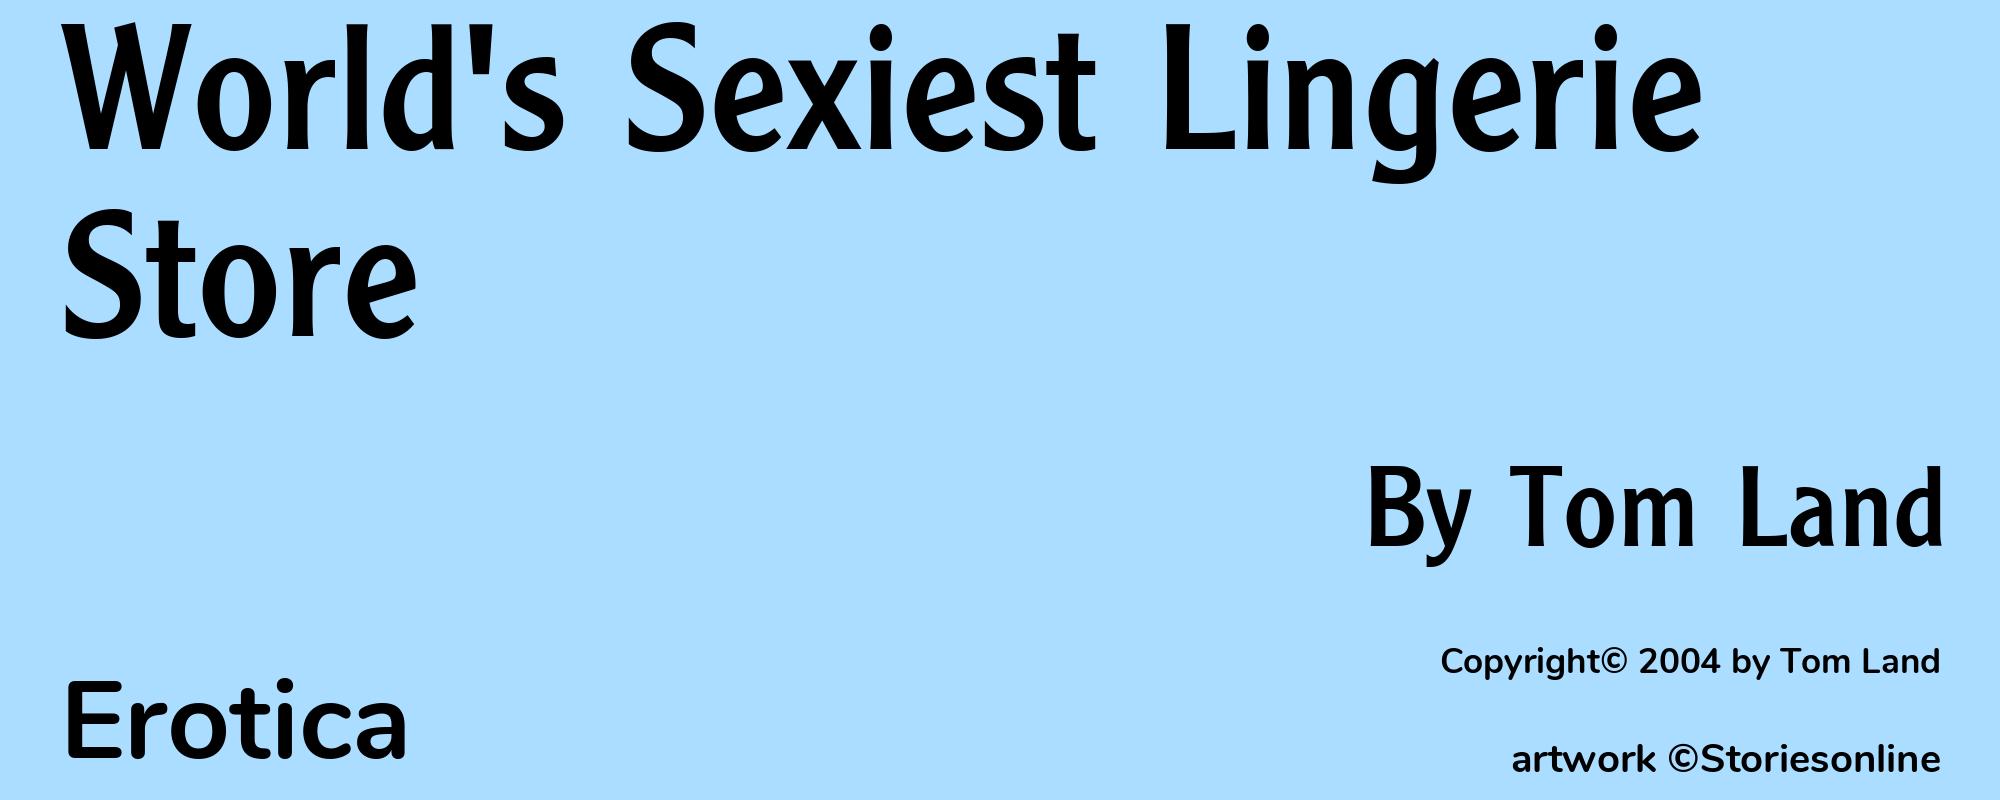 World's Sexiest Lingerie Store - Cover